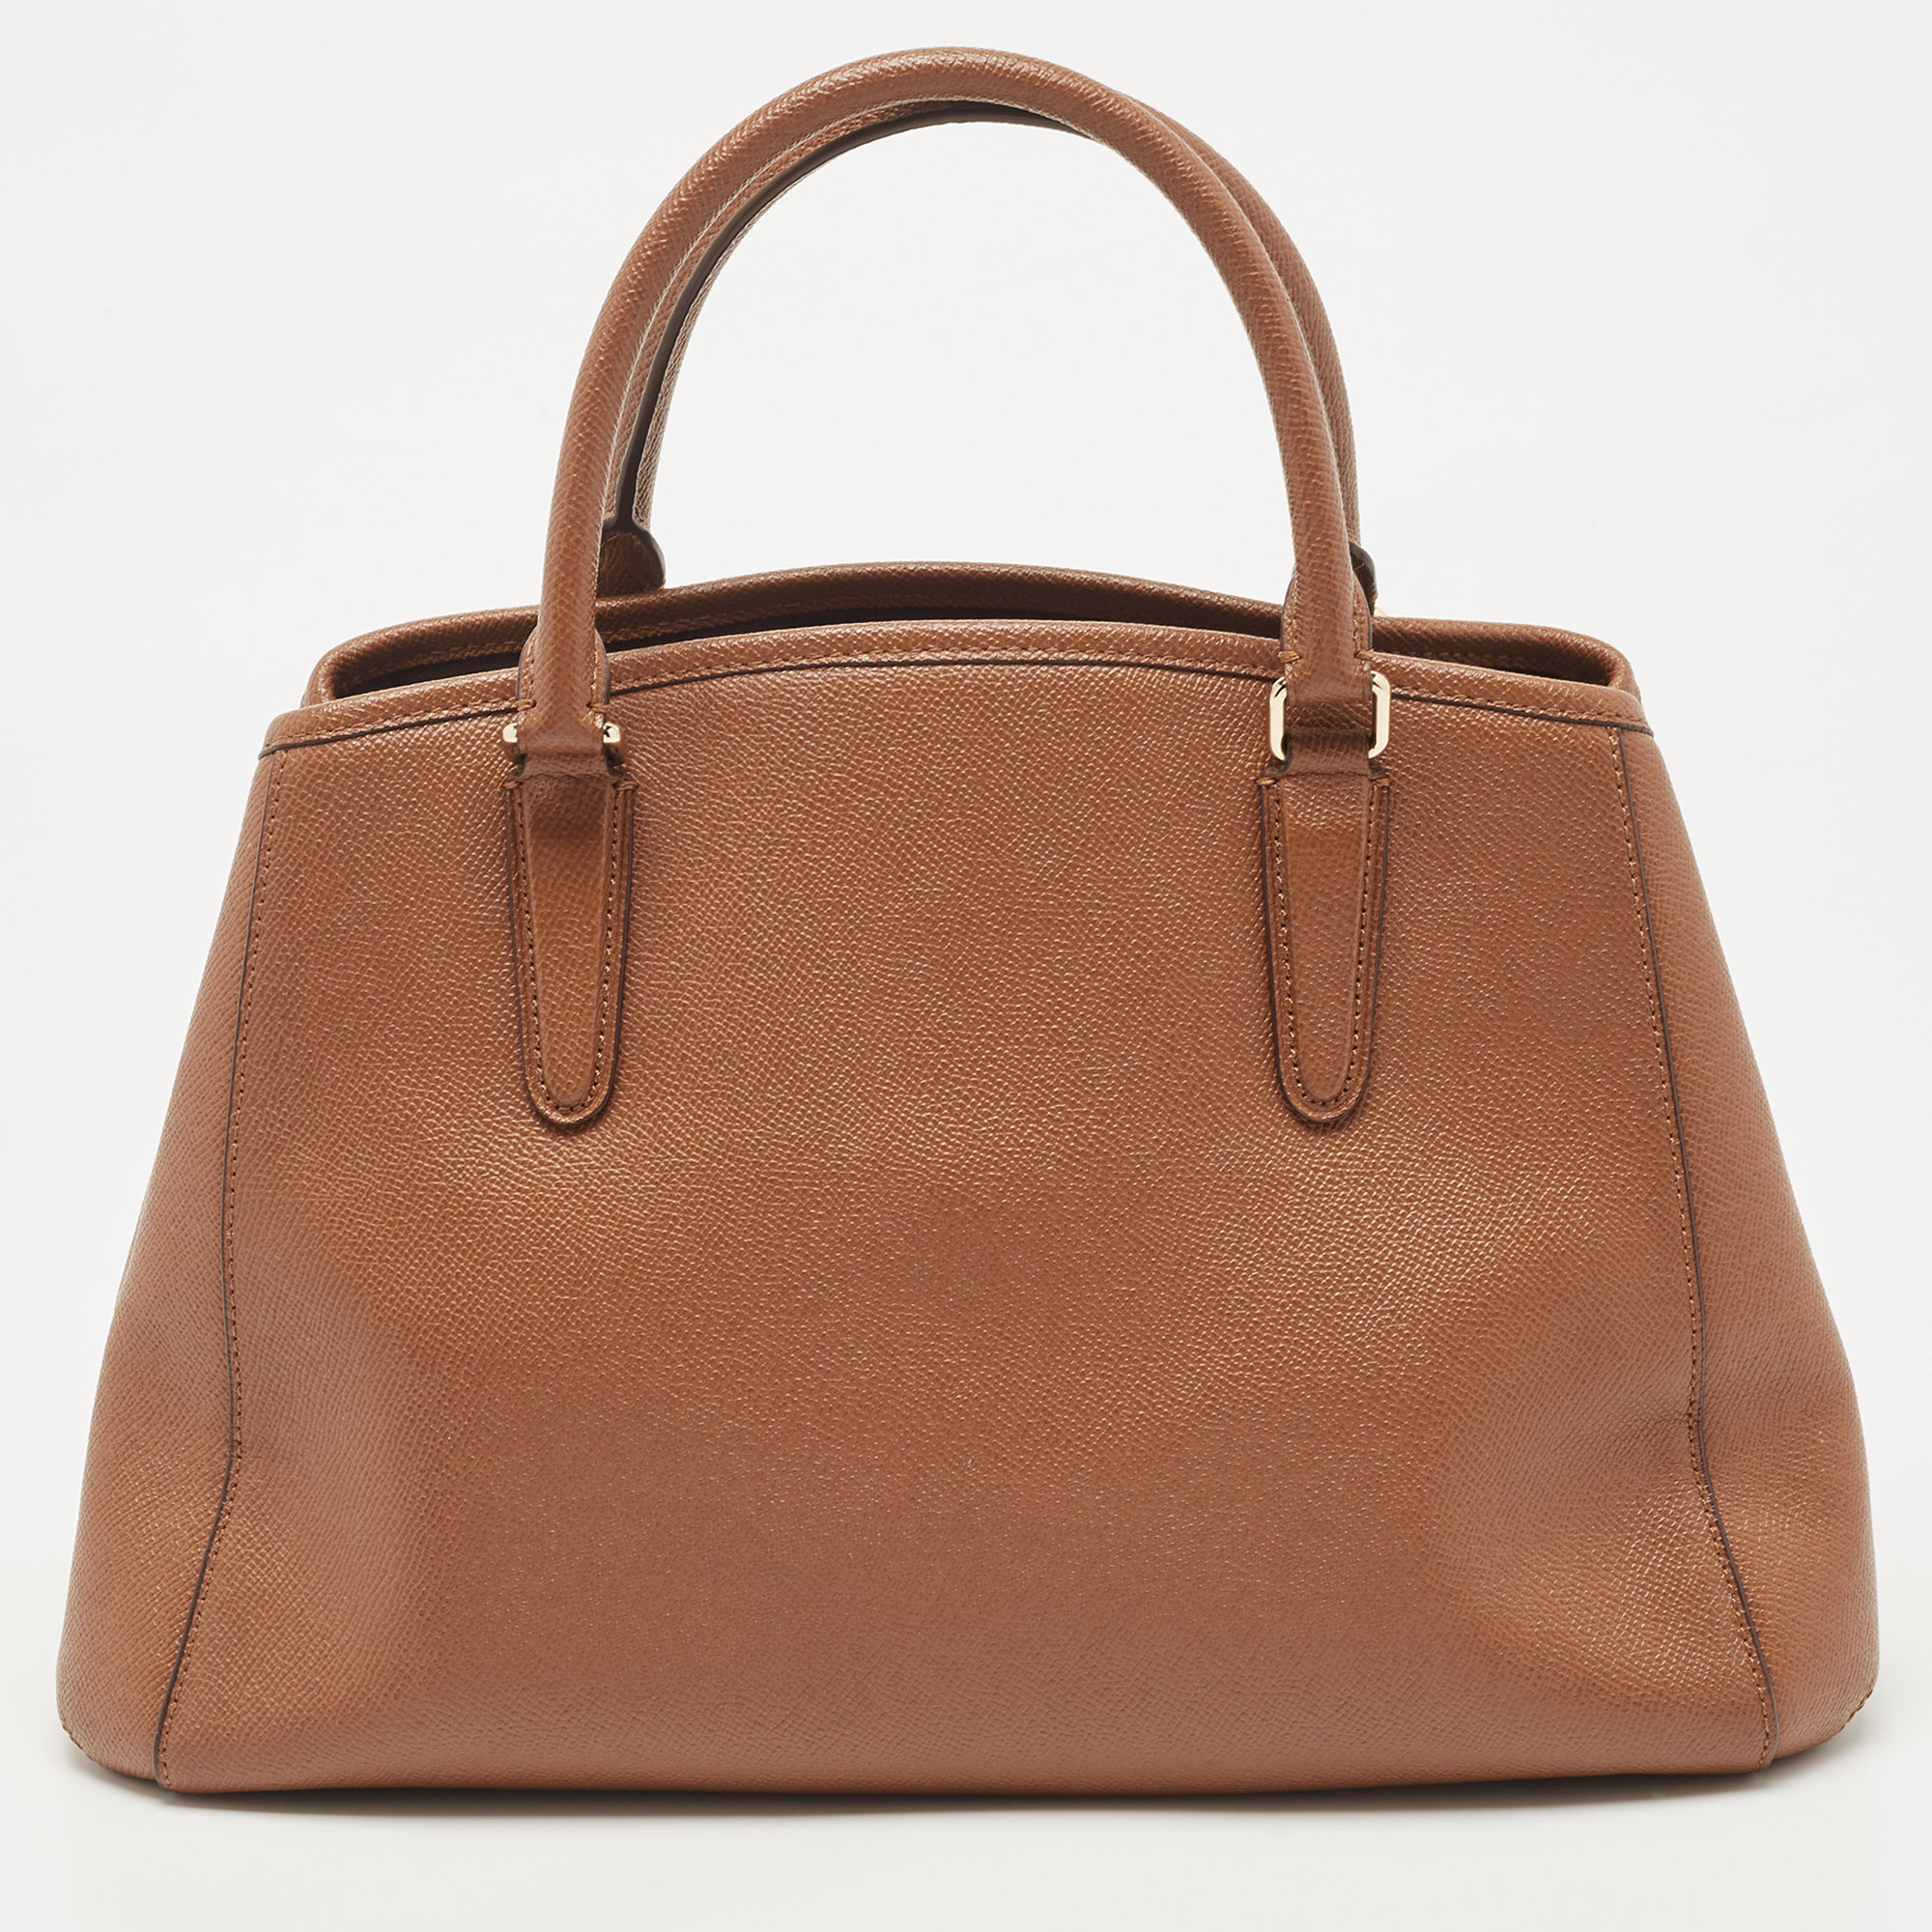 Coach Brown Leather Small Margot Carryall Satchel